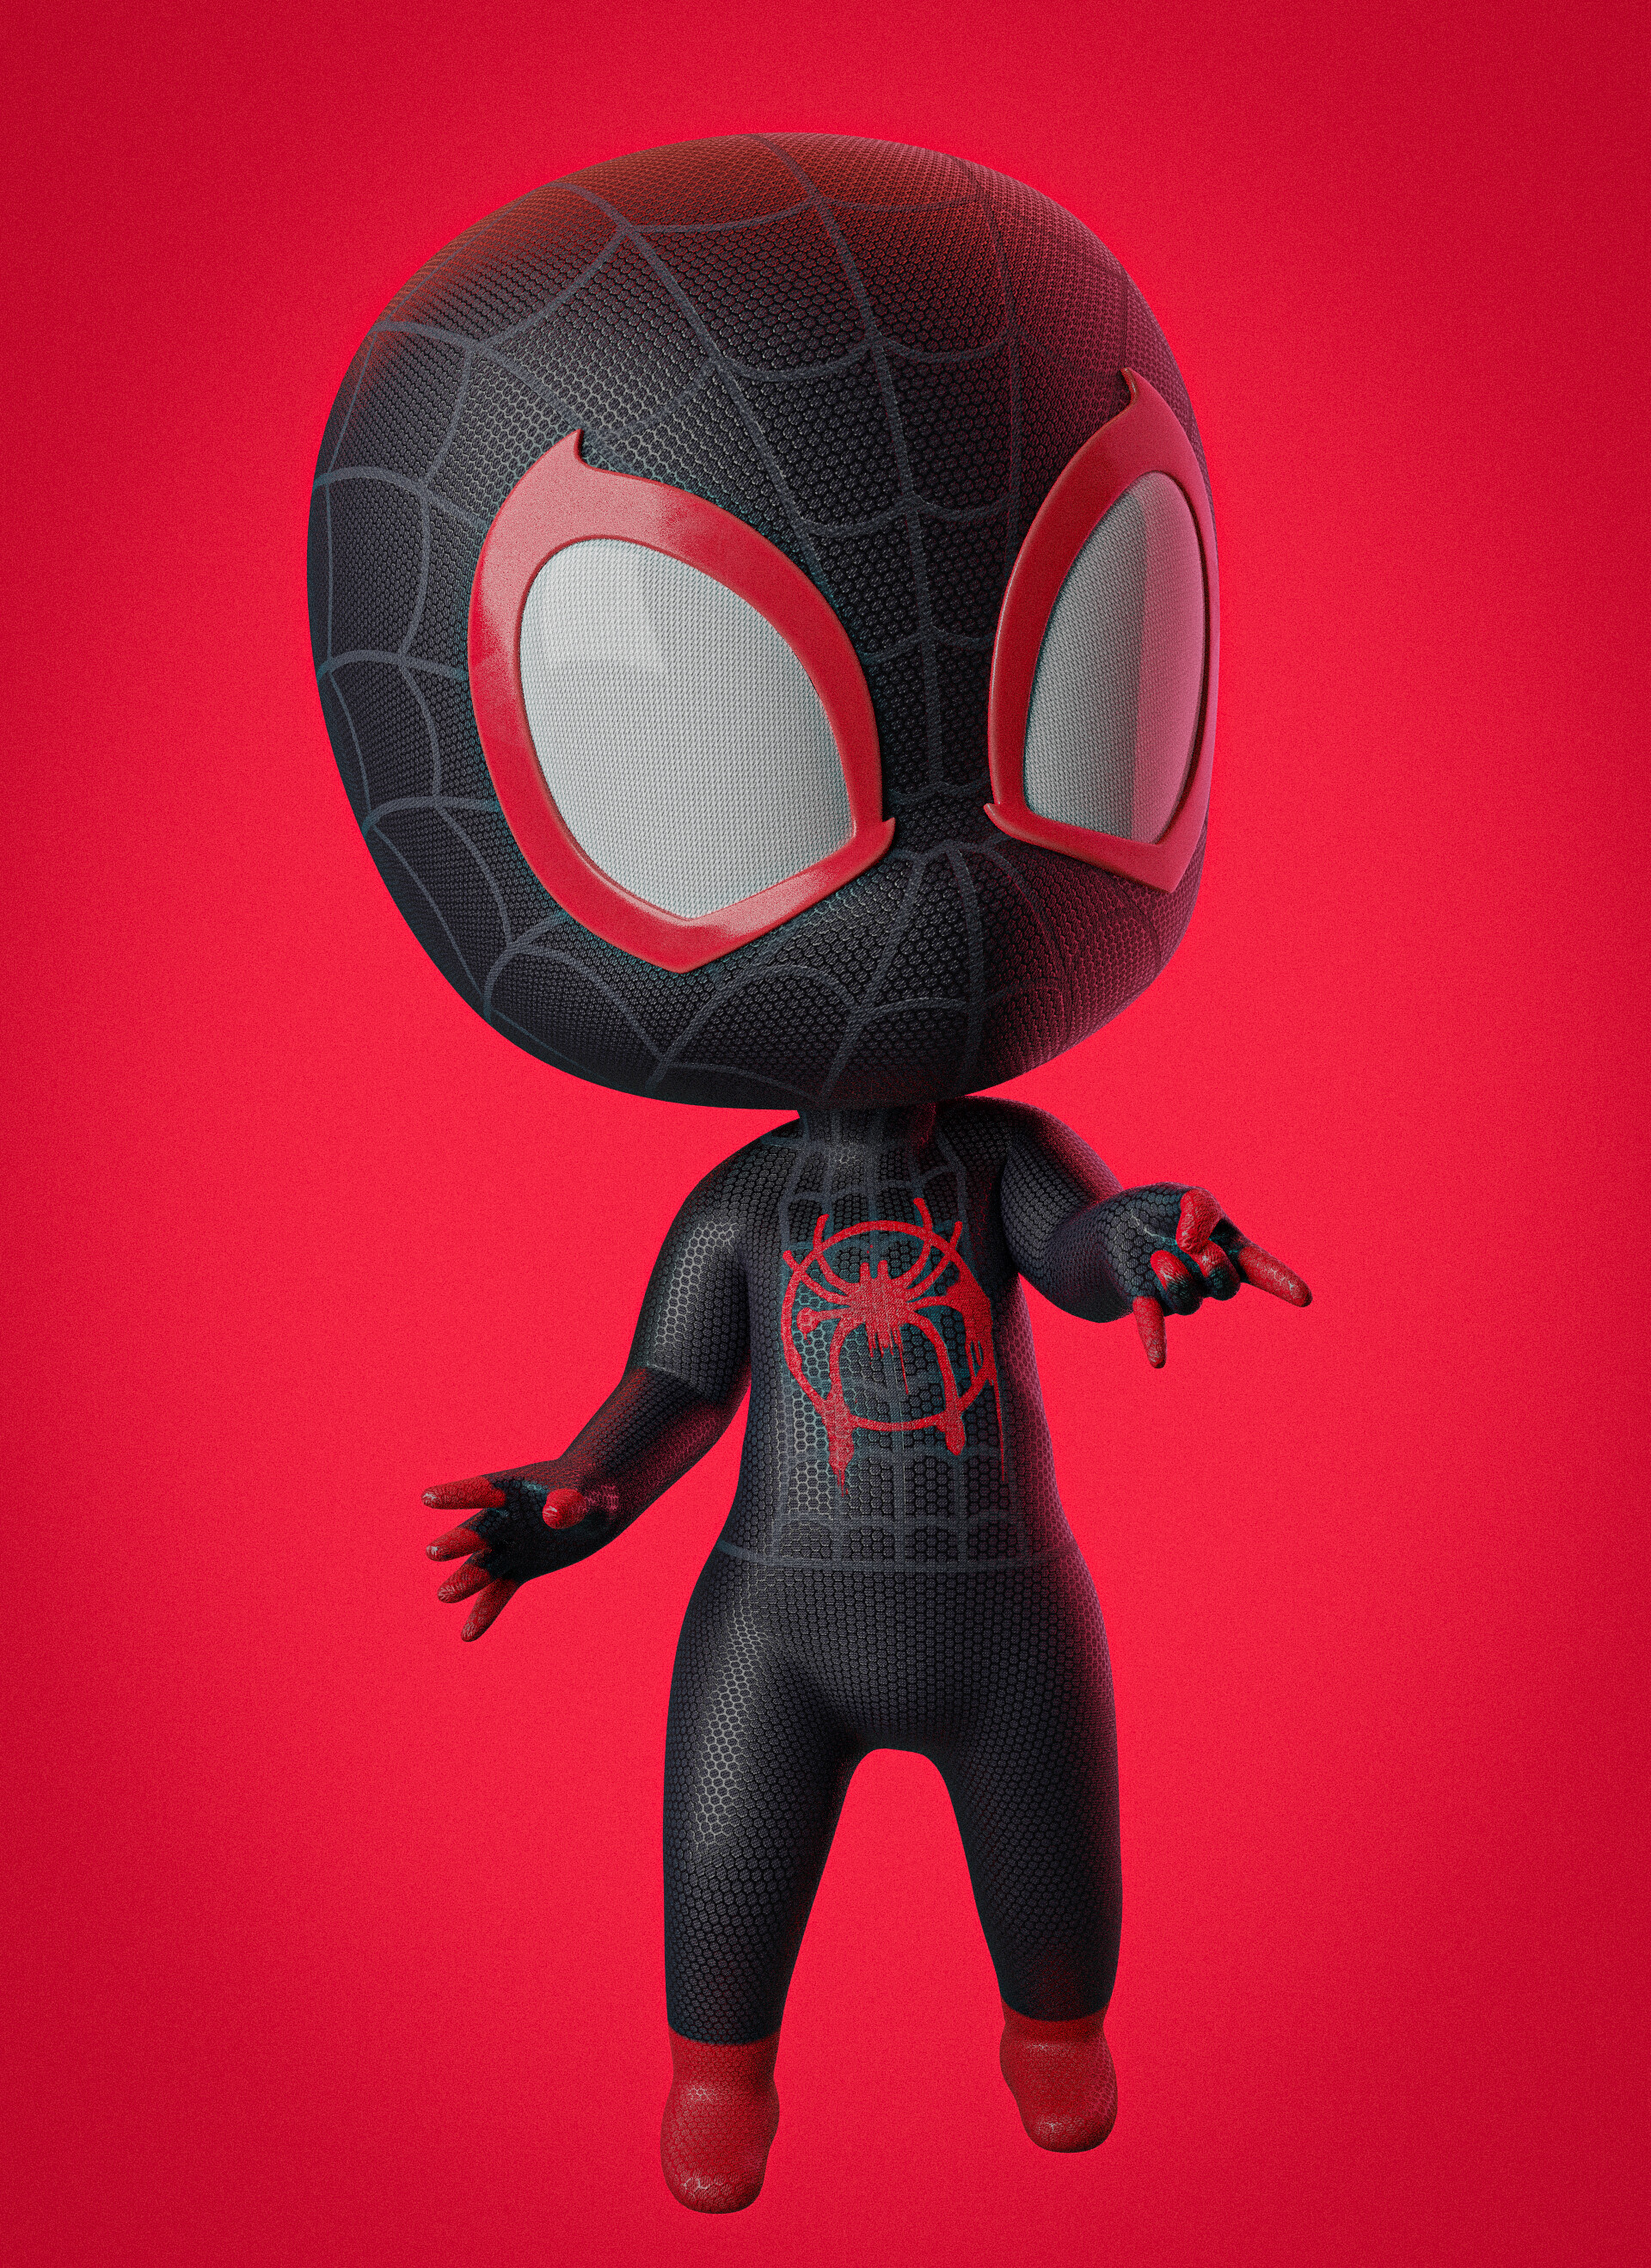 Chibi Spiderman - Finished Projects - Blender Artists Community